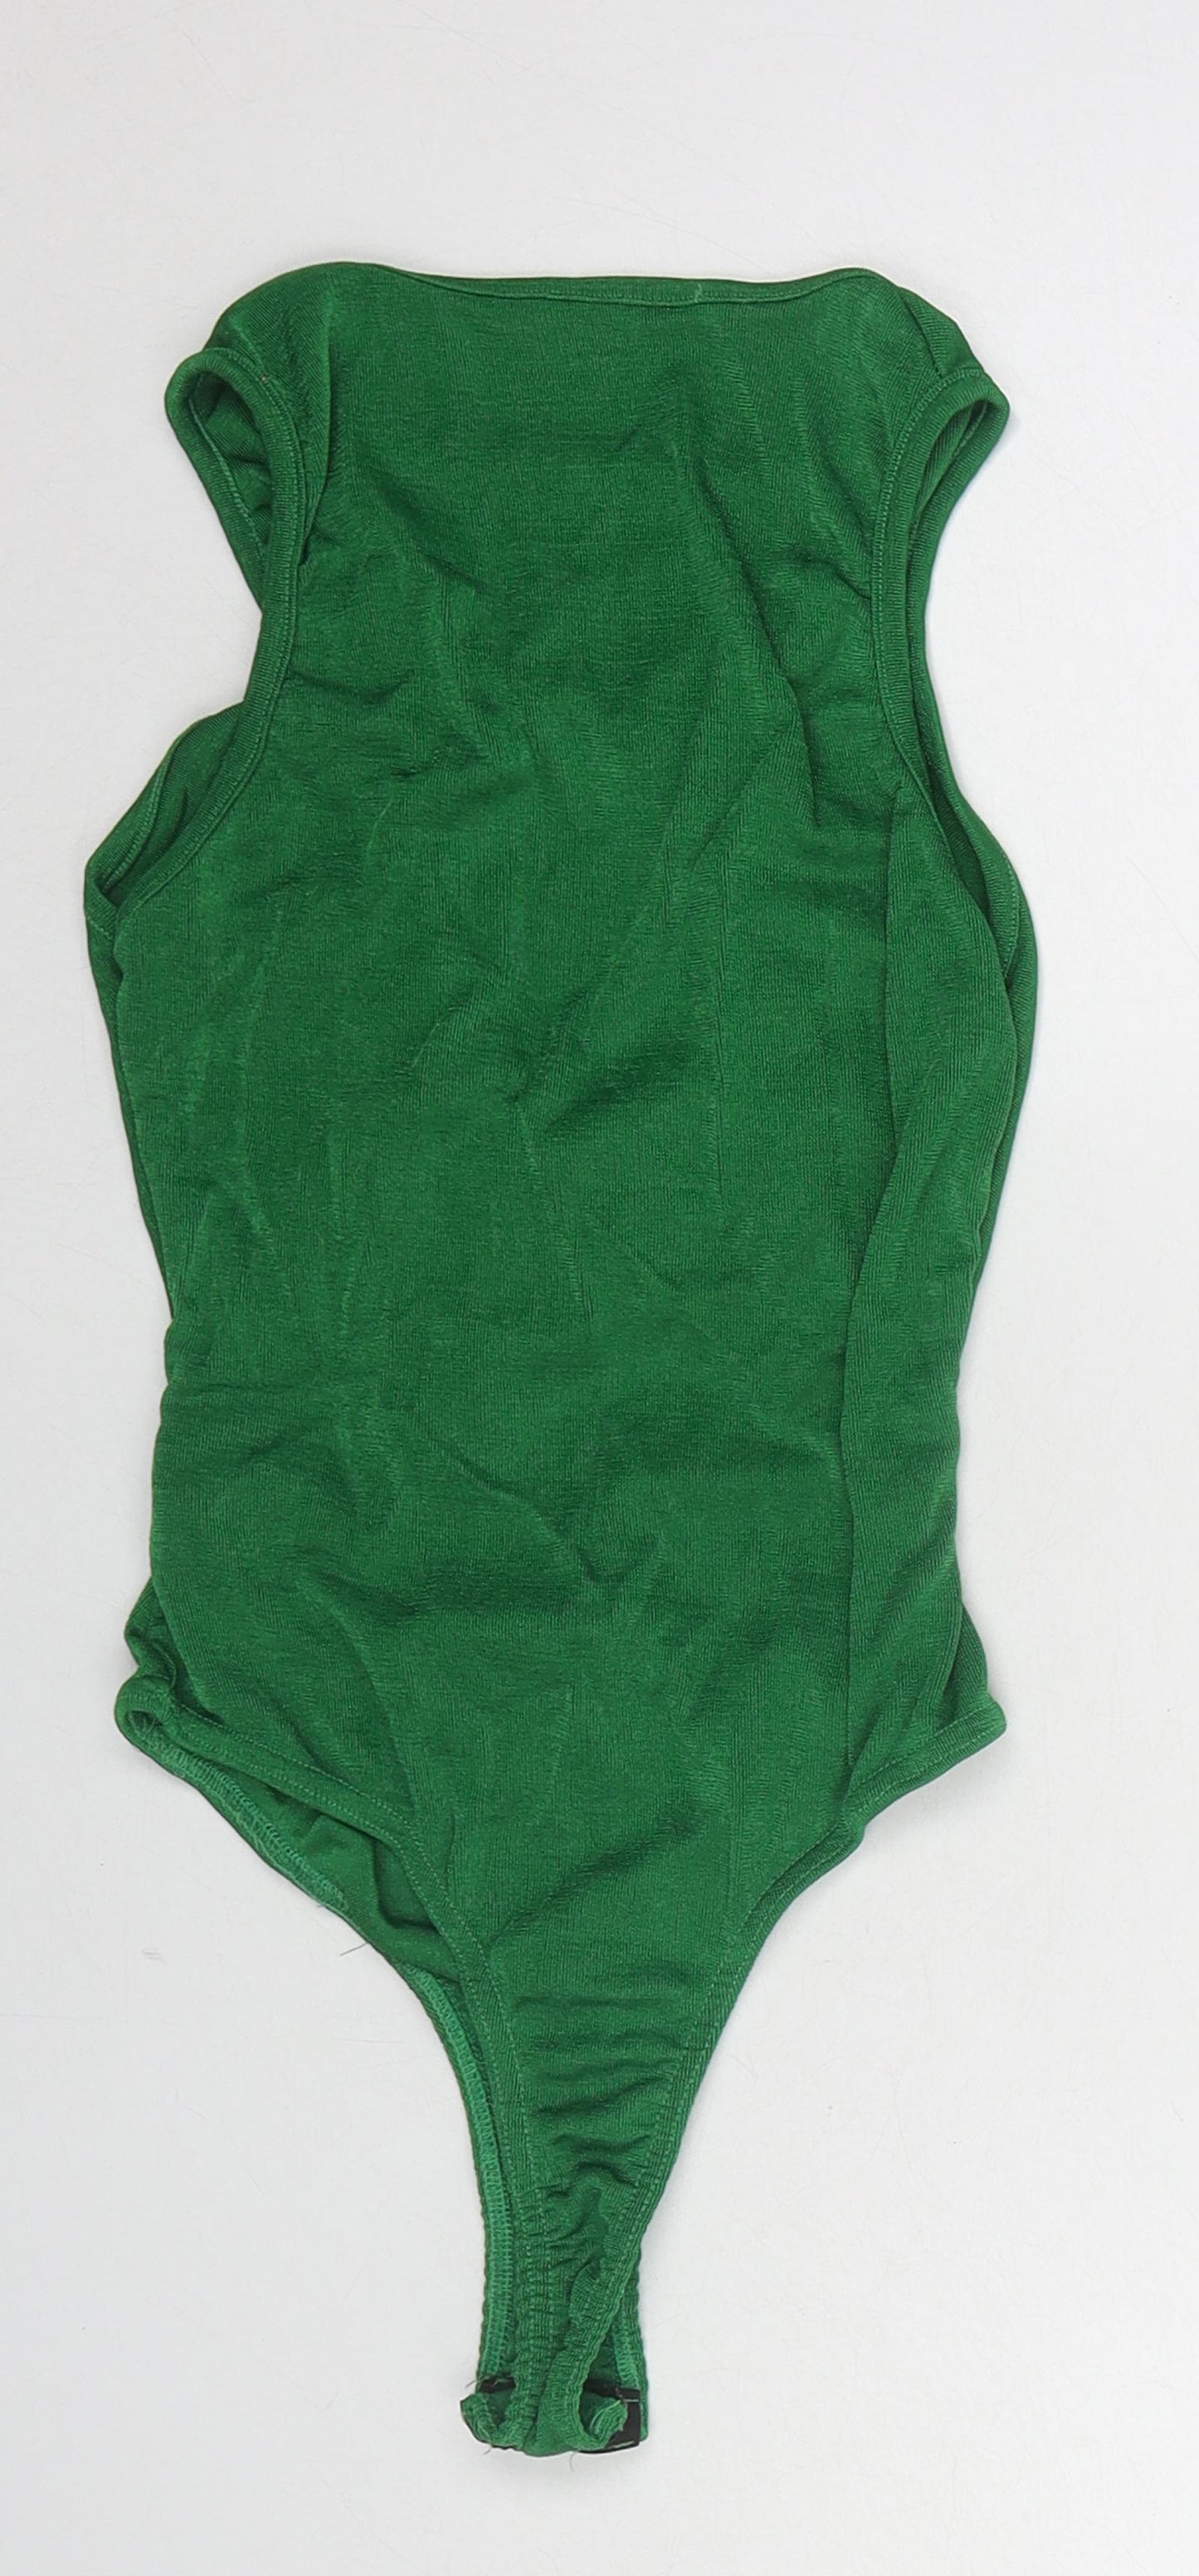 PRETTYLITTLETHING Womens Green Polyester Bodysuit One-Piece Size 8 Snap - Cut Out Back Detail